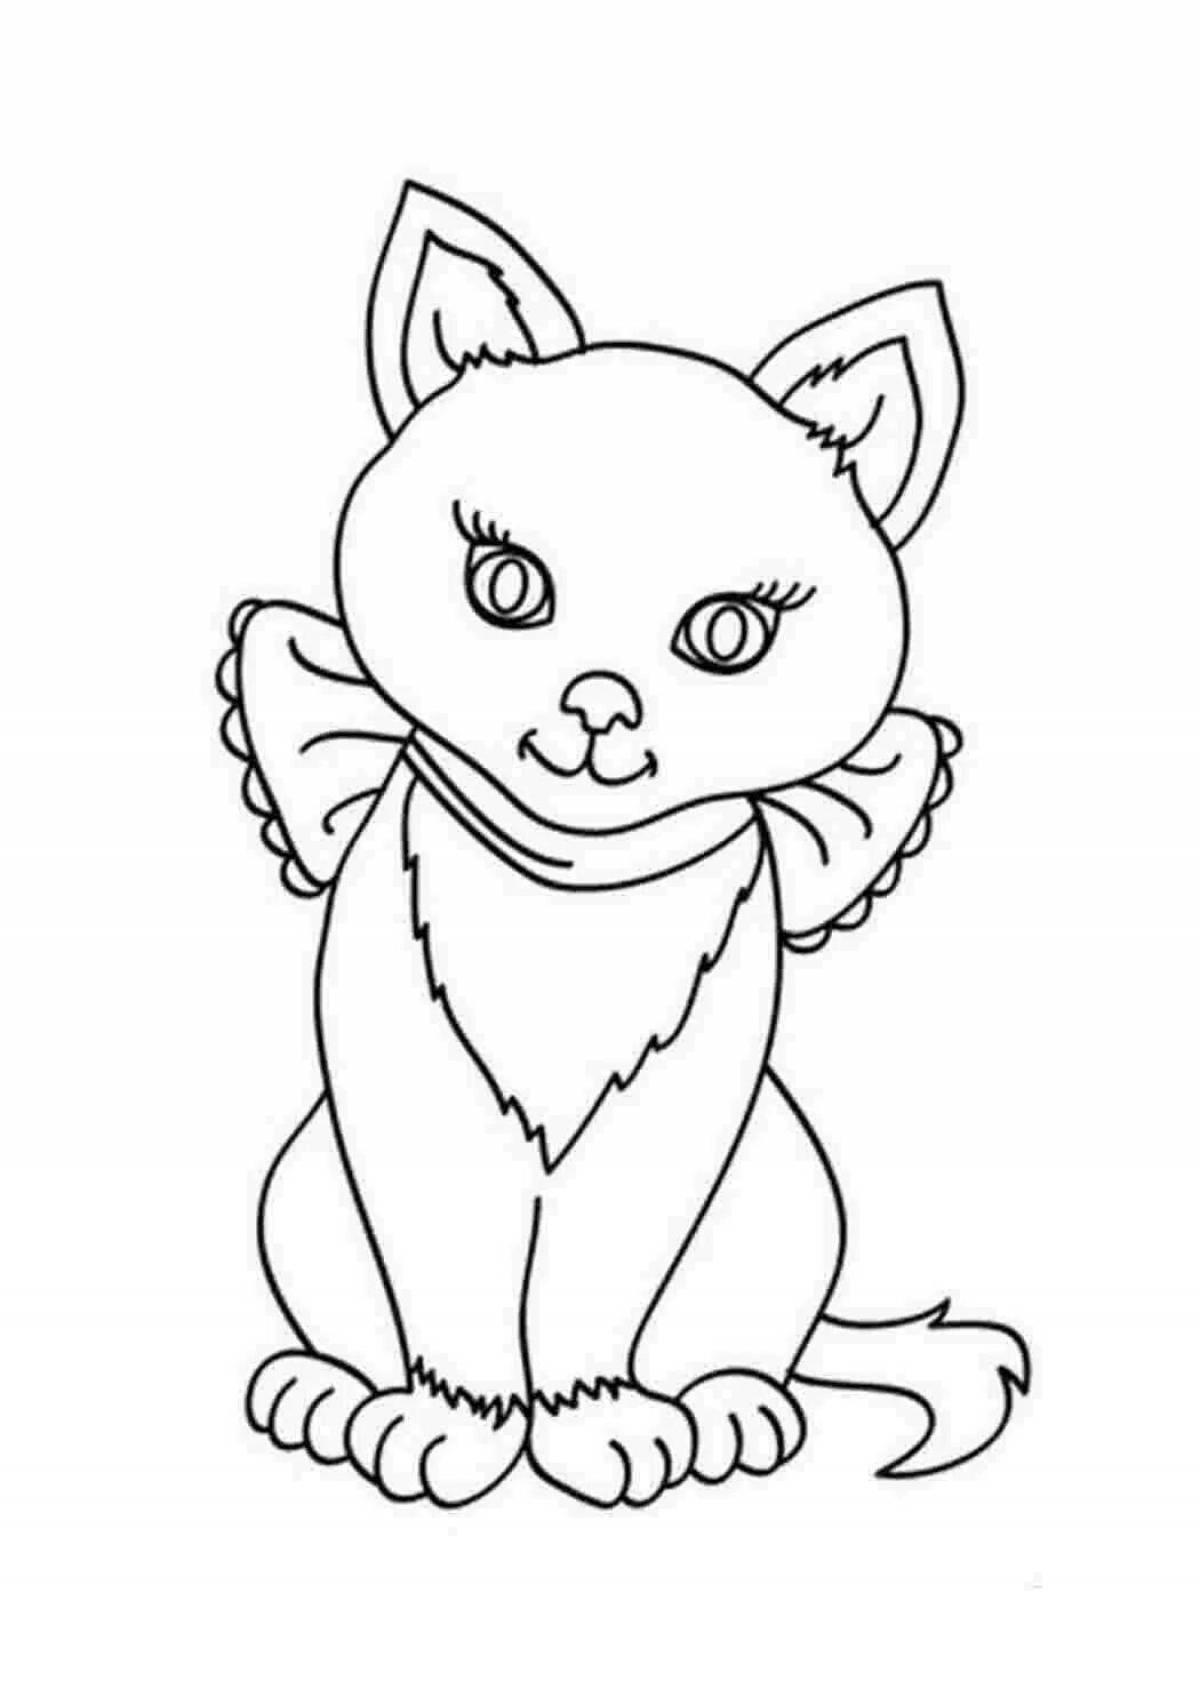 Coloring page grinning little kitty